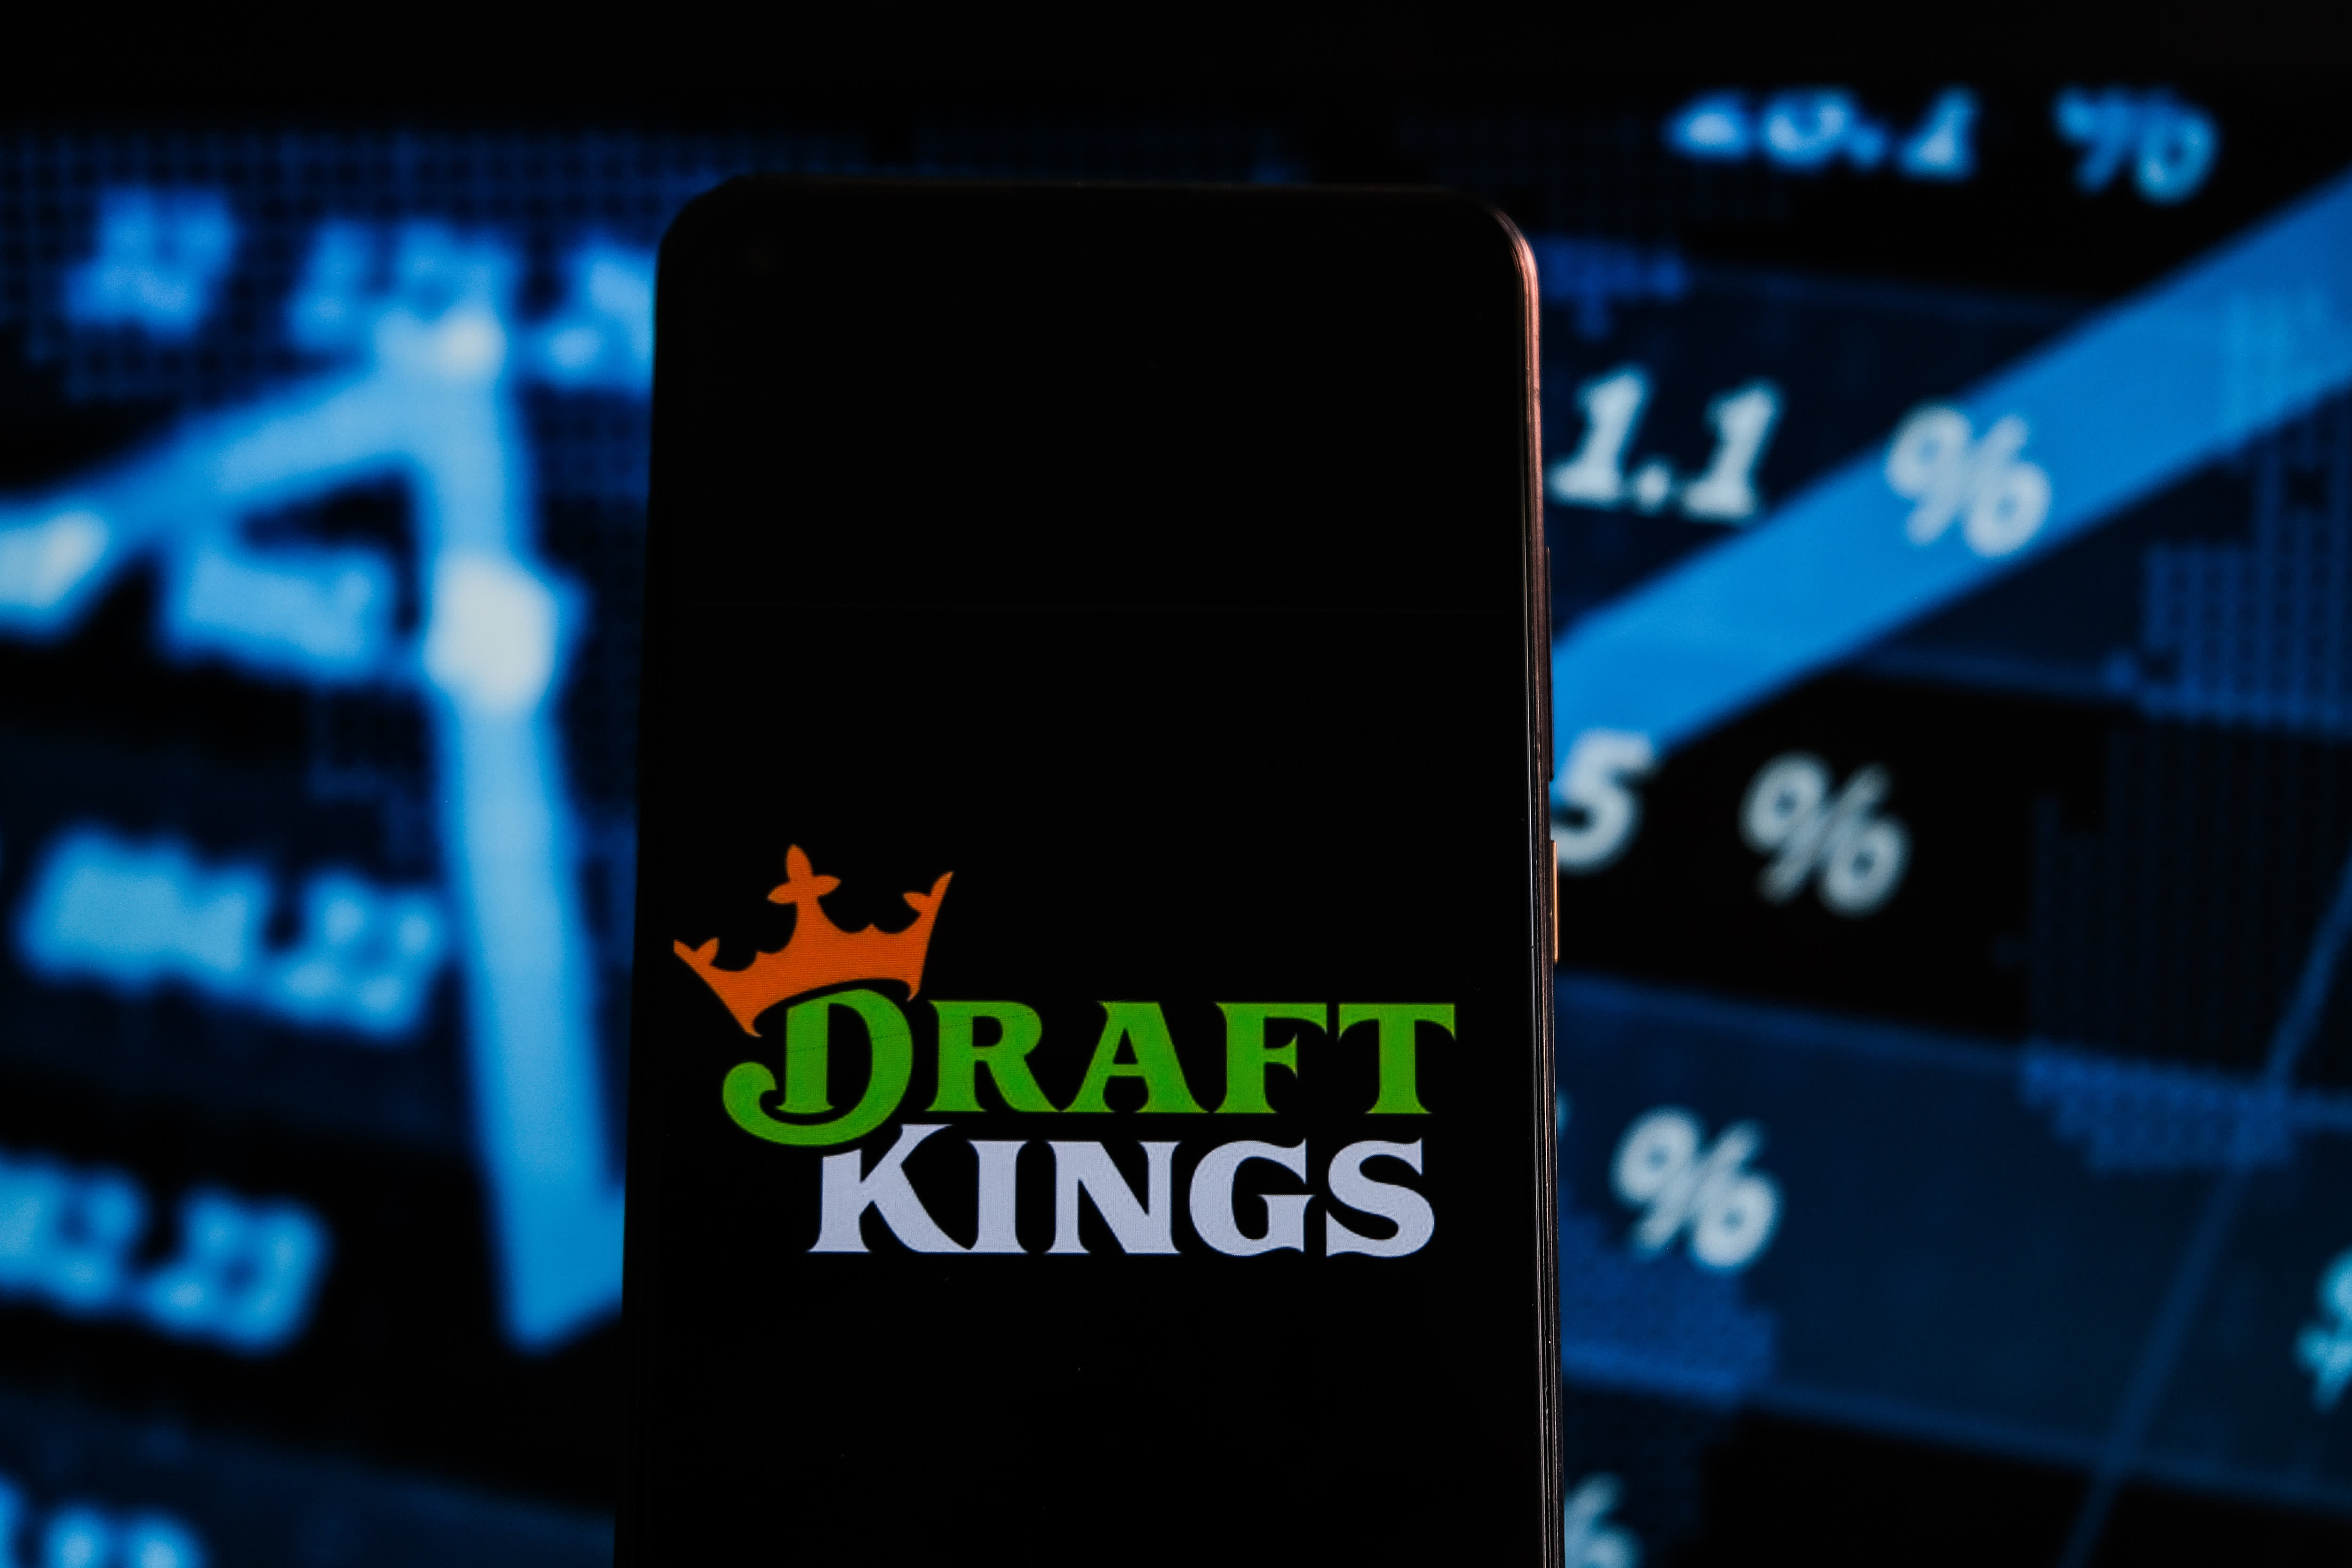 DraftKings offers to buy PointsBet for 5 million, outbidding Fanatics